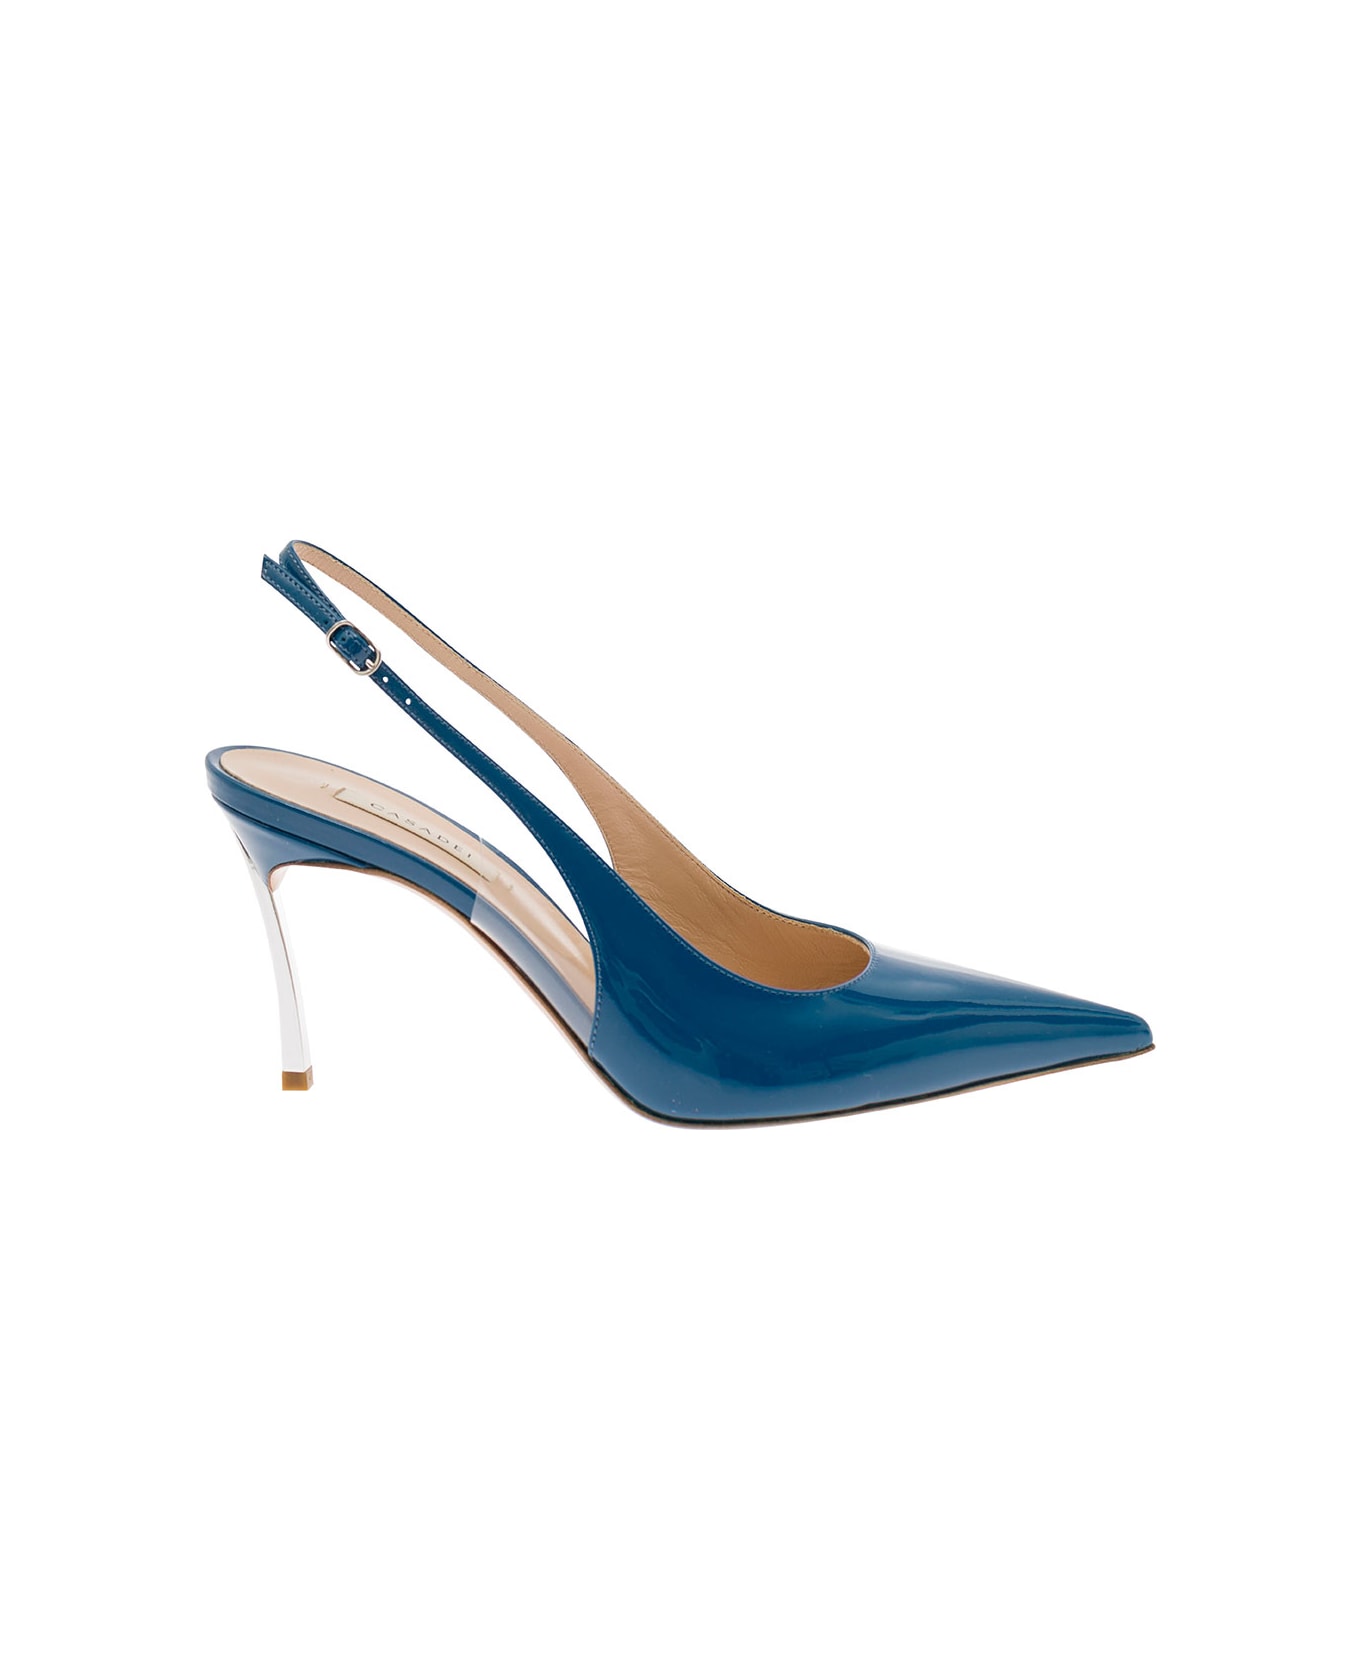 Casadei Light Blue Slingback Pumps With Blade Heel In Patent Leather Woman - Blu ハイヒール